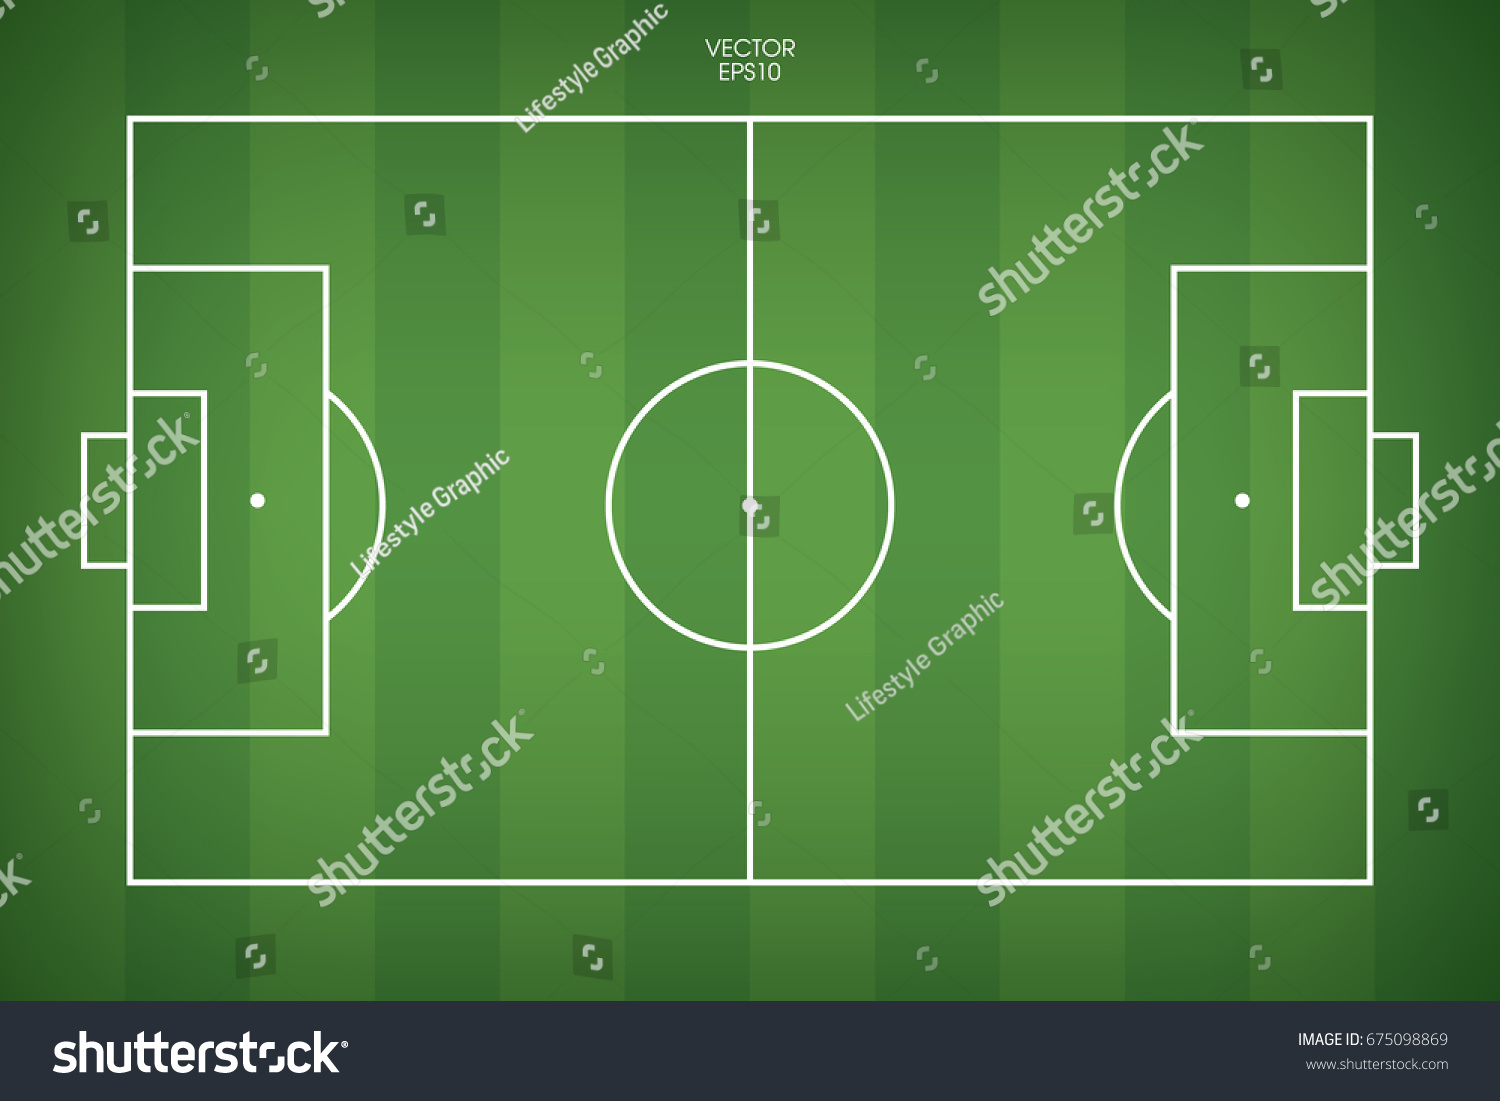 Football field or soccer field background. Vector green court for create game.